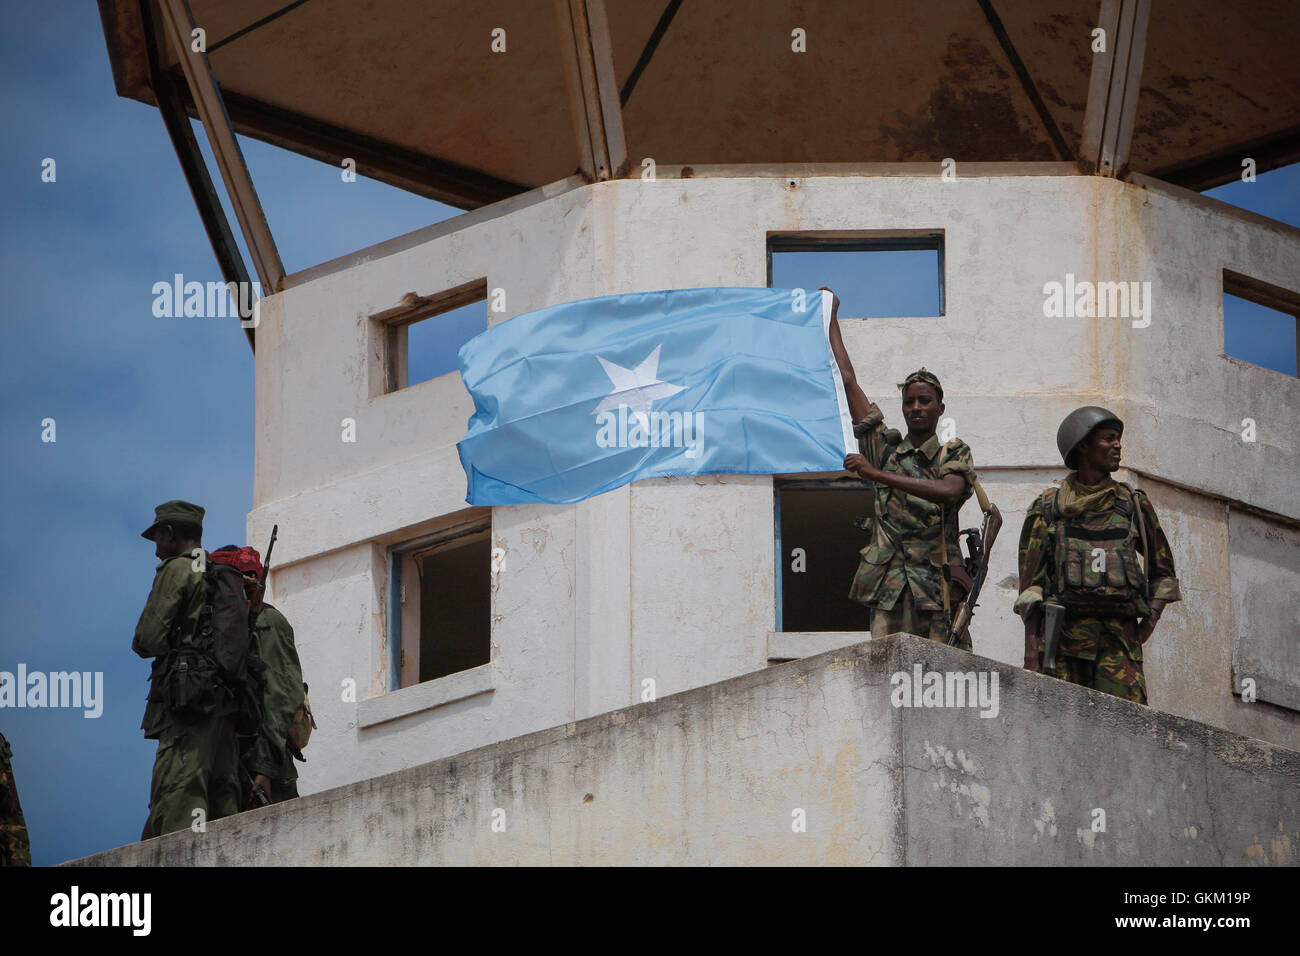 SOMALIA, Kismayo: In a handout photograph released by the African Union-United Nations Information Support Team 02 October, members of the Somali National Army and the government-allied Ras Kimboni militia display the Somali national flag from the former control tower of Kismayo Airport while they celebrate it's capture after Kenyan AMISOM troops moved into and through Kismayo, the hitherto last major urban stronghold of the Al-Qaeda-affiliated extremist group Al Shabaab, on their way to the airport without a shot being fired following a two-month operation to liberate towns and villages acros Stock Photo